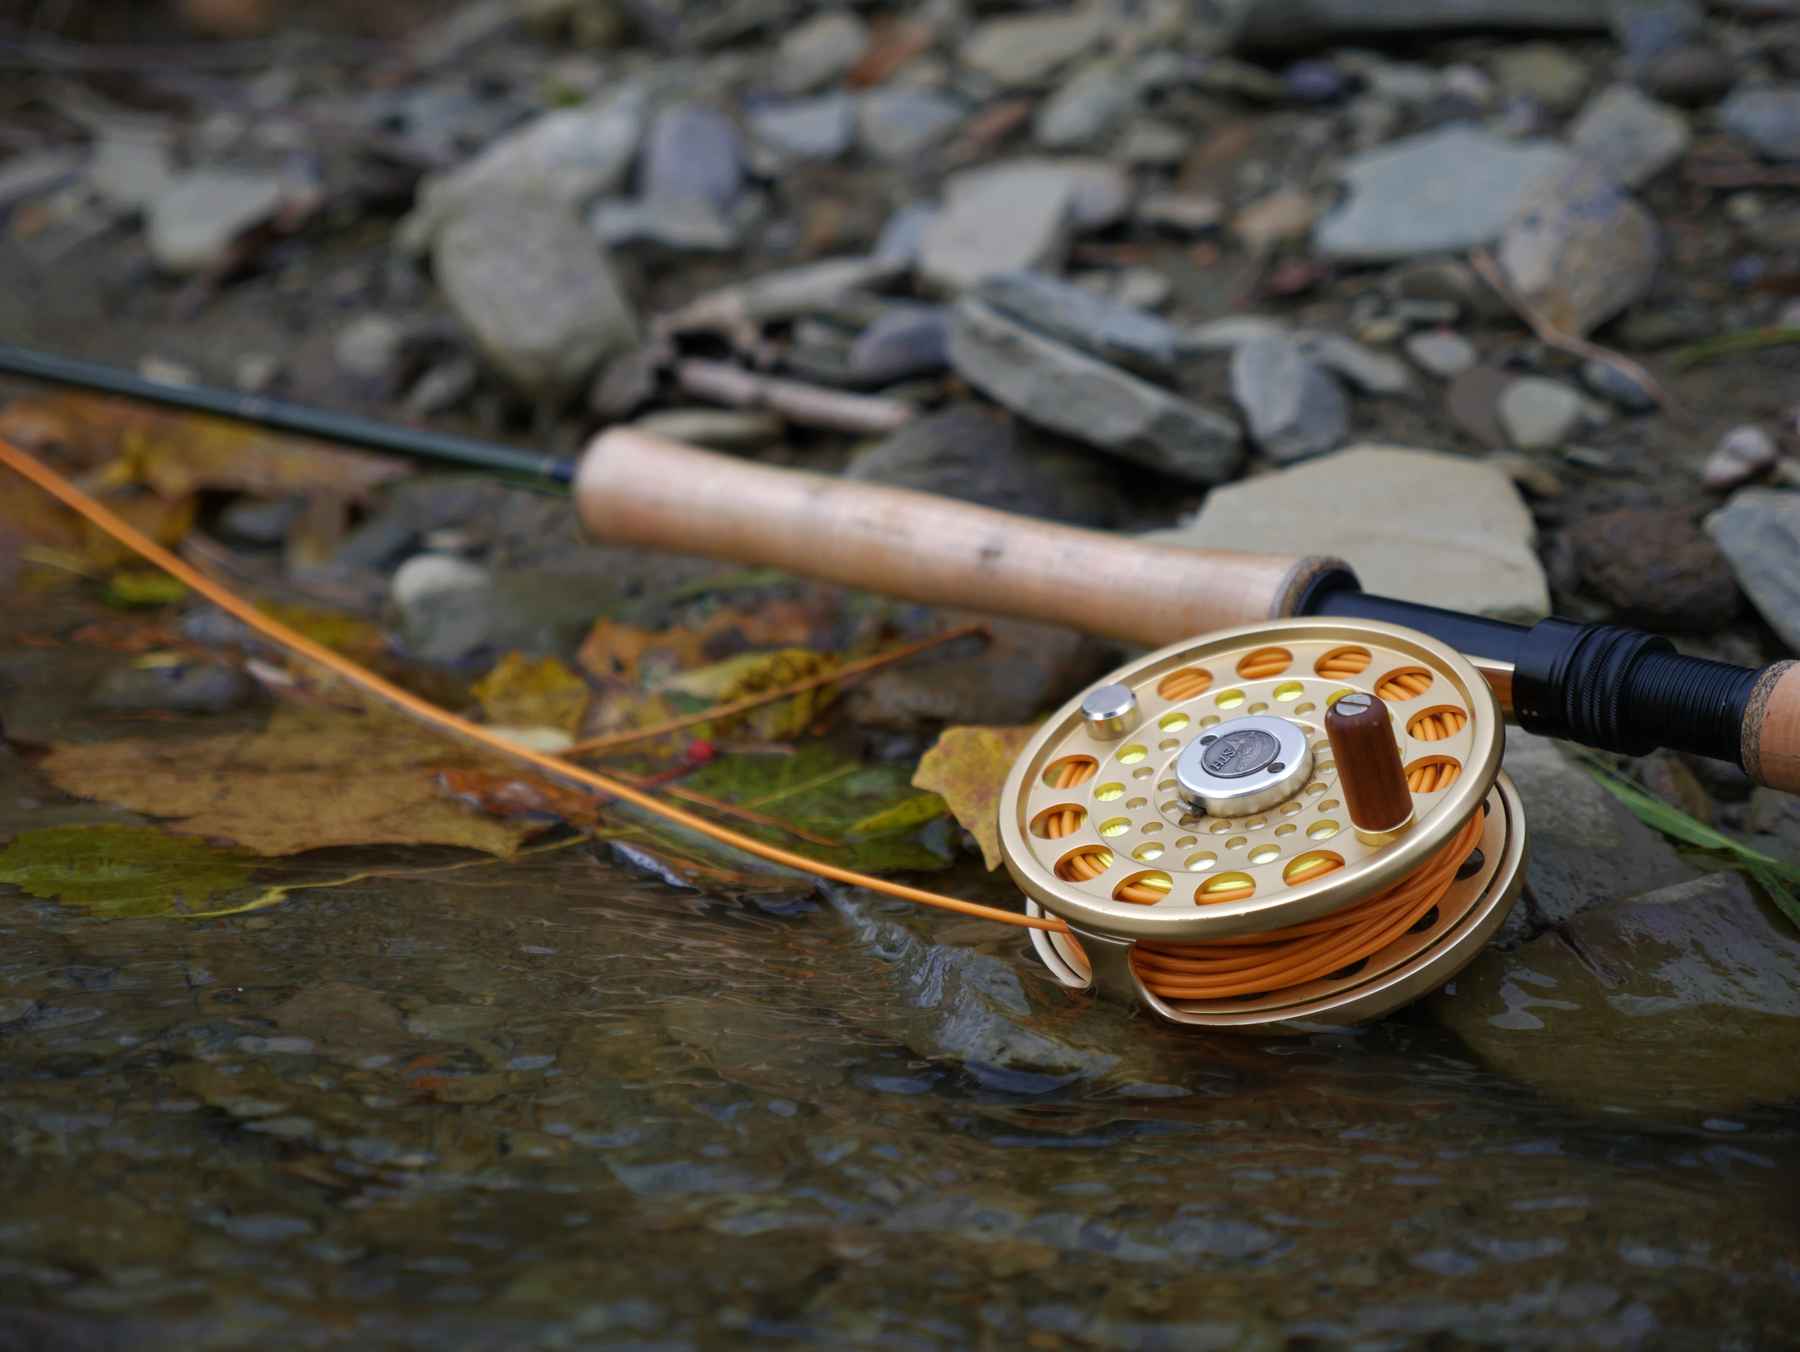 Tfo Bvk Fly Rod 20 Off Trident Fly Fishing